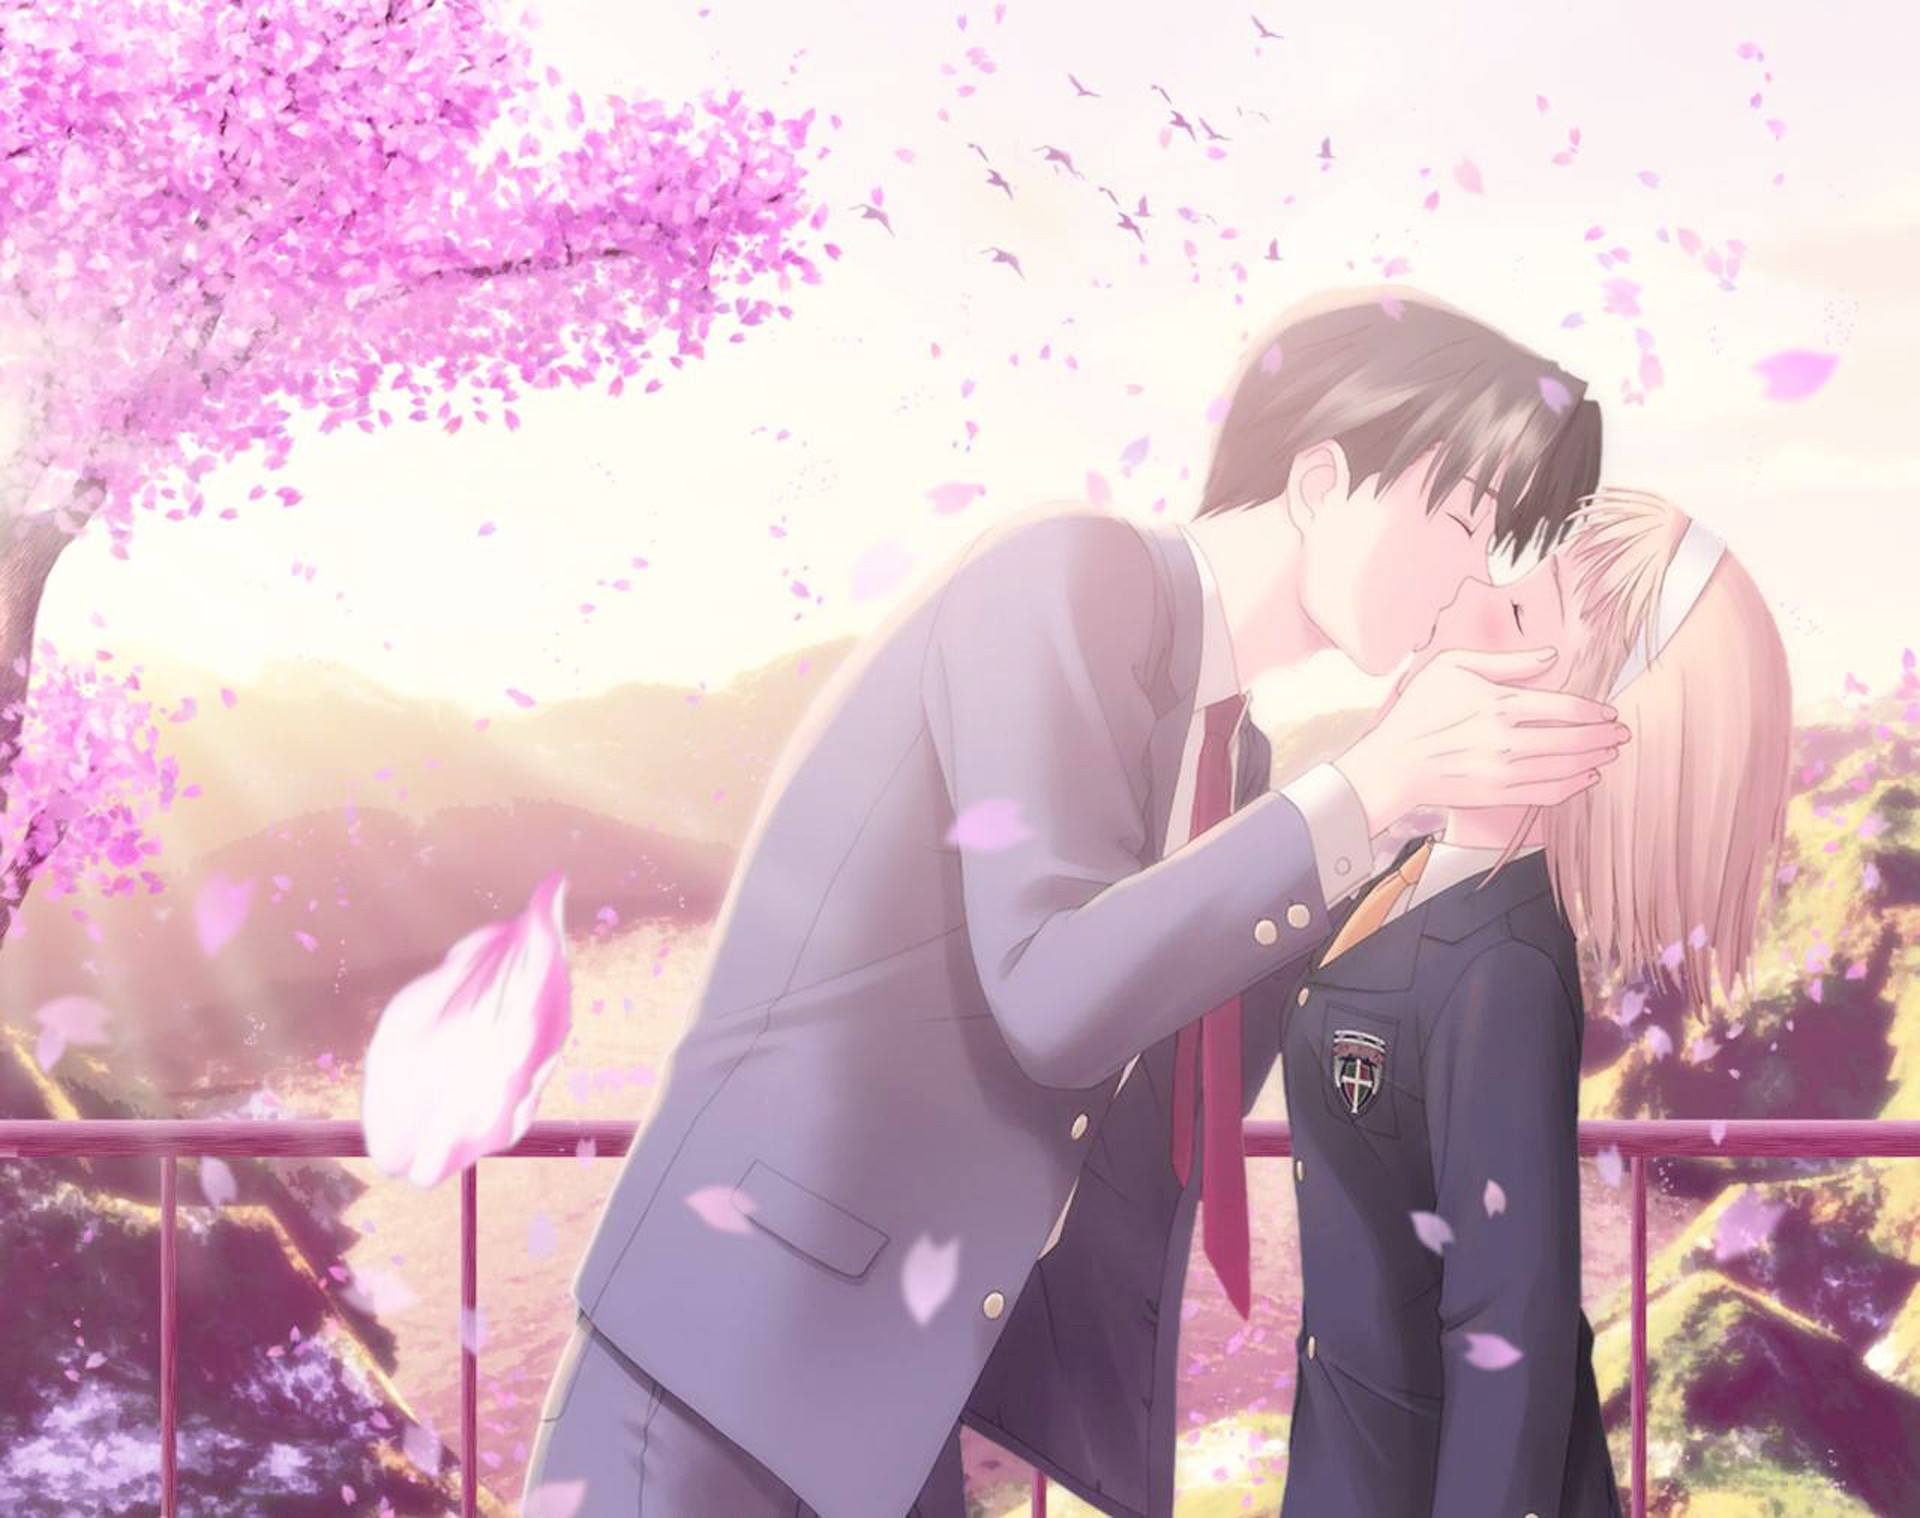 Animated Happy Kiss Day Image Wallpaper New HD